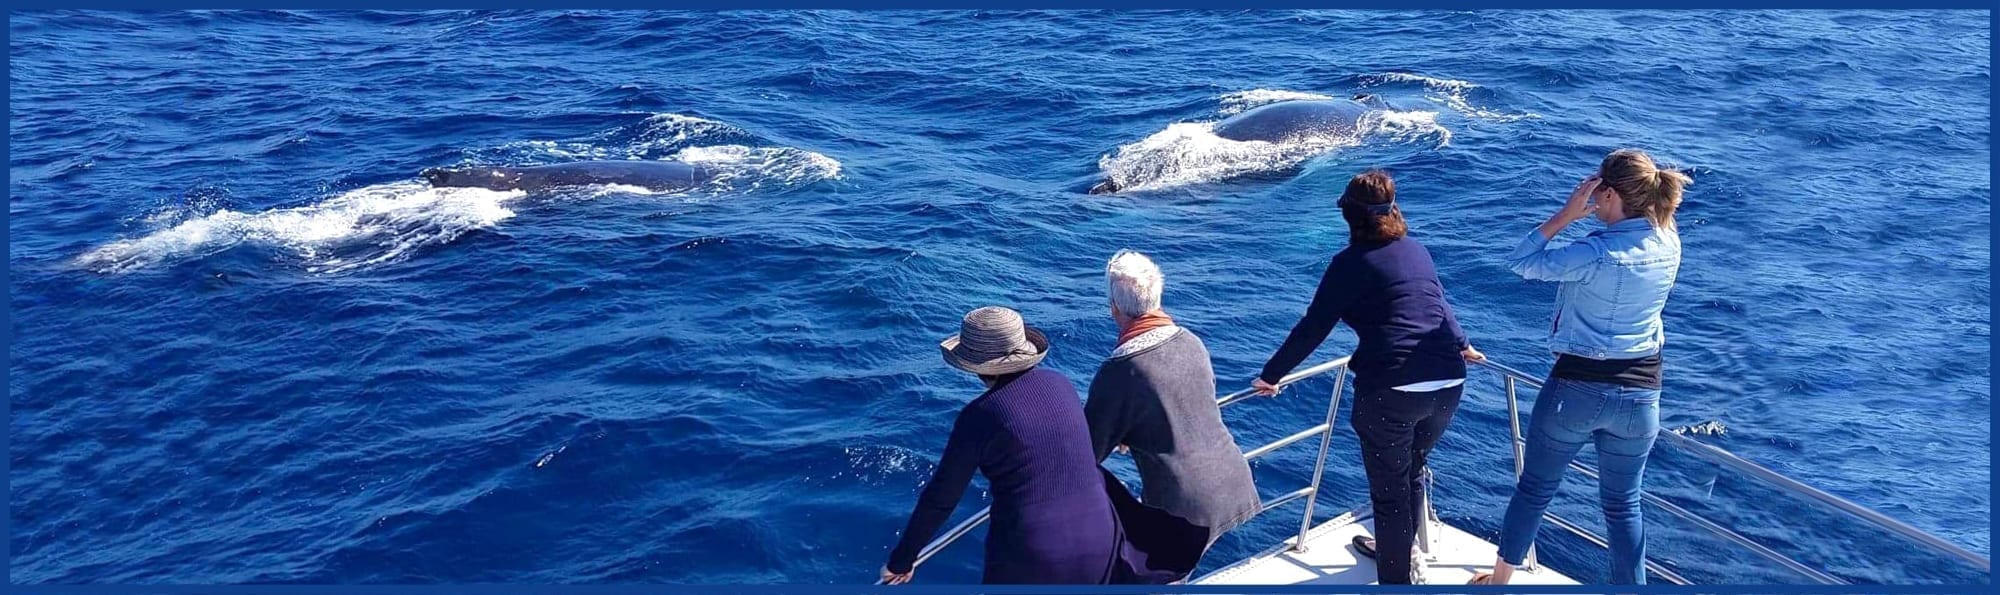 Whale Watching – No Crowds & a Rail-Side Position Guarantee!